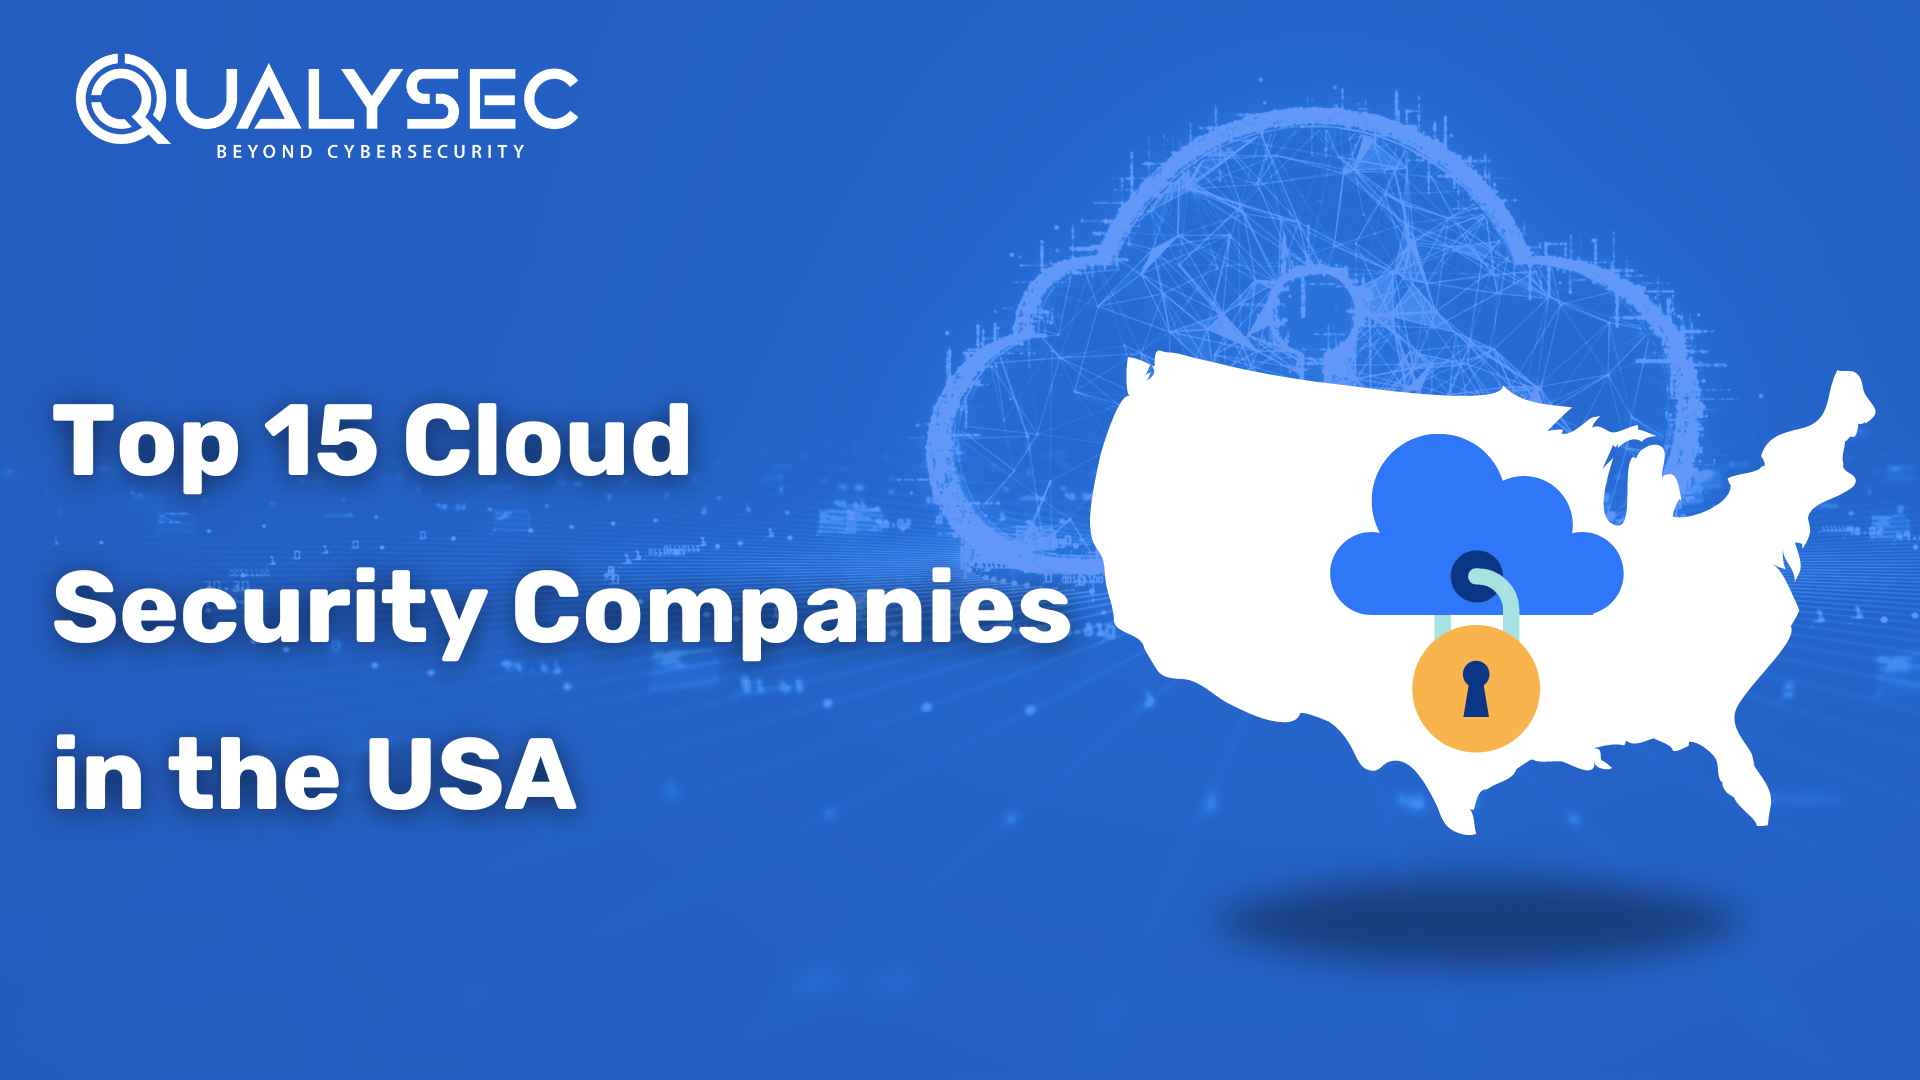 Top 15 Cloud Security Companies in the USA